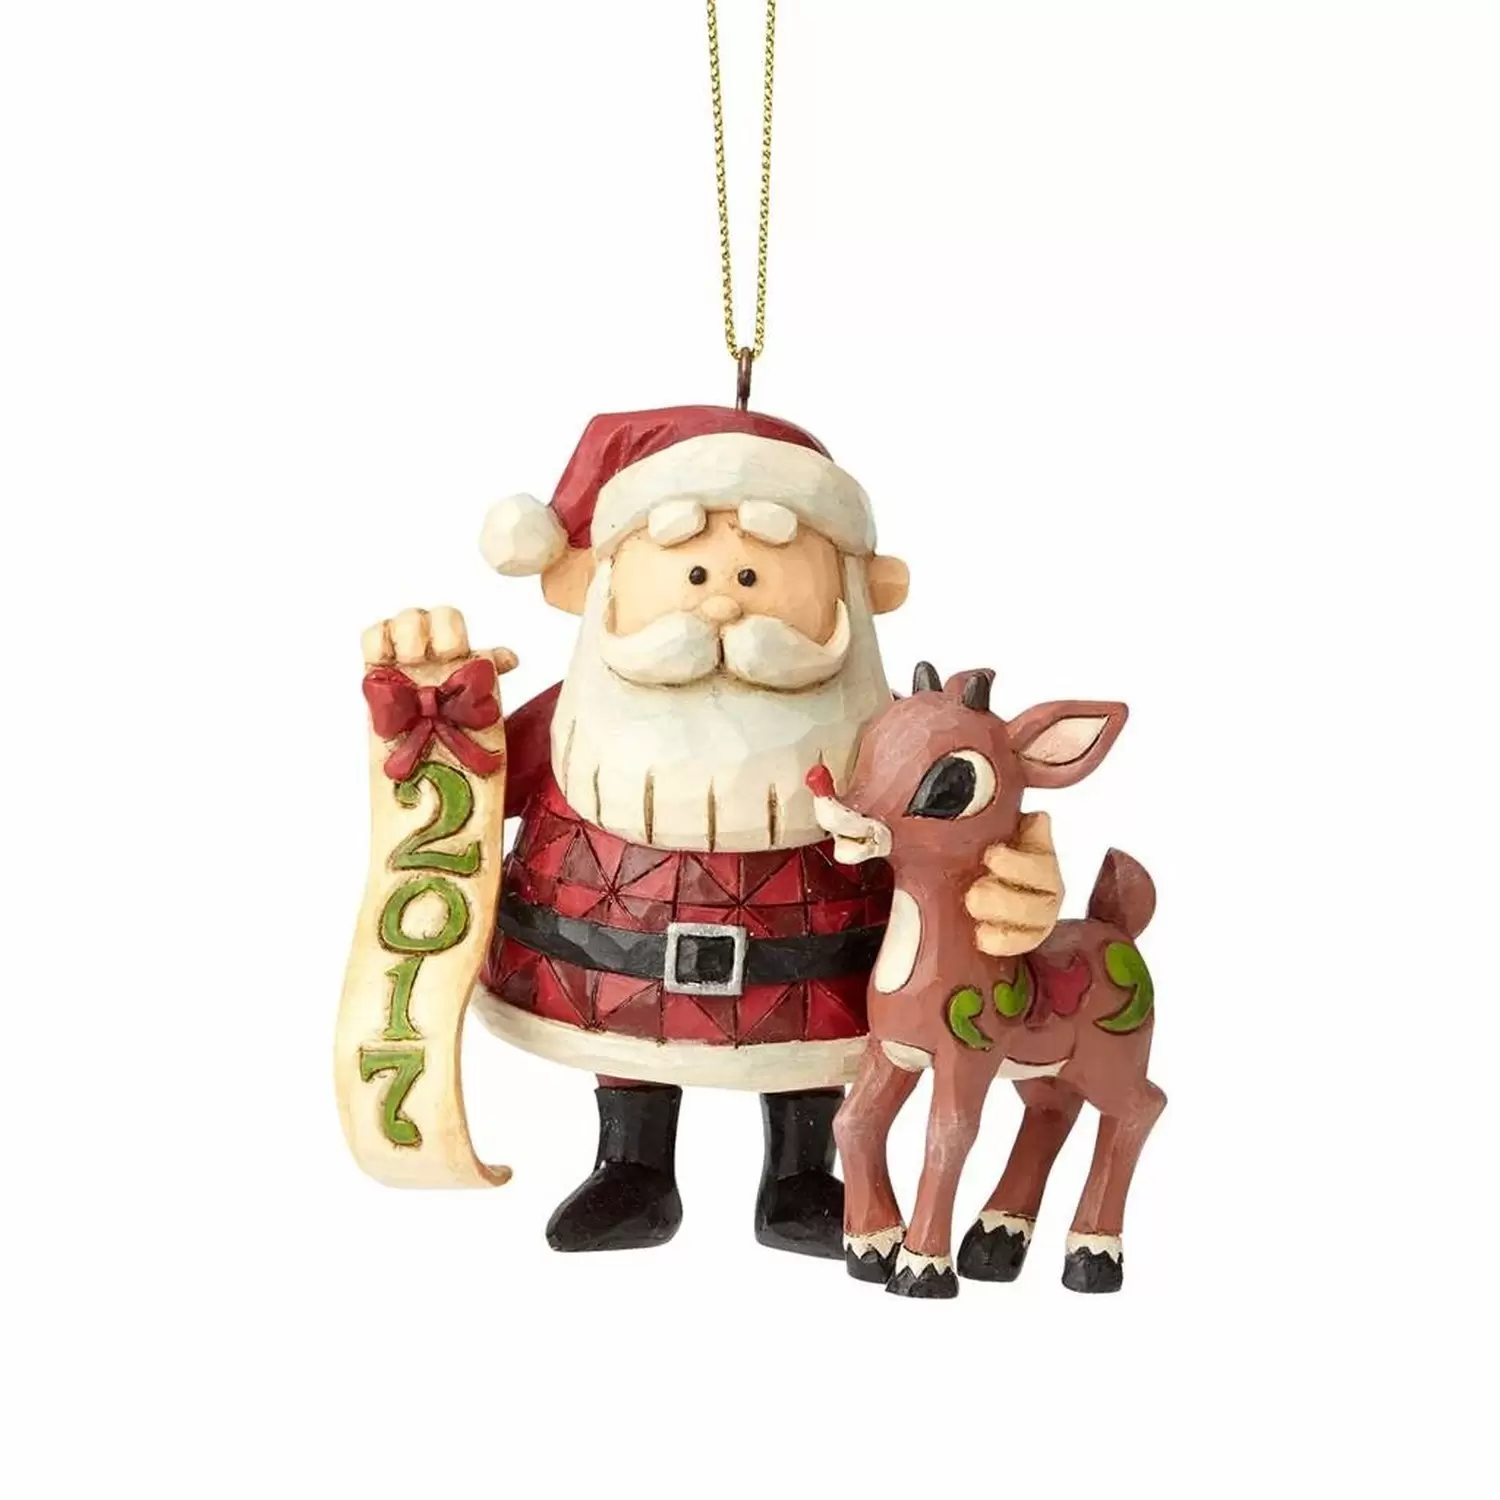 Cartoons Characters by Jim Shore - Rudolph and Santa 2017 Dated Hanging Ornament